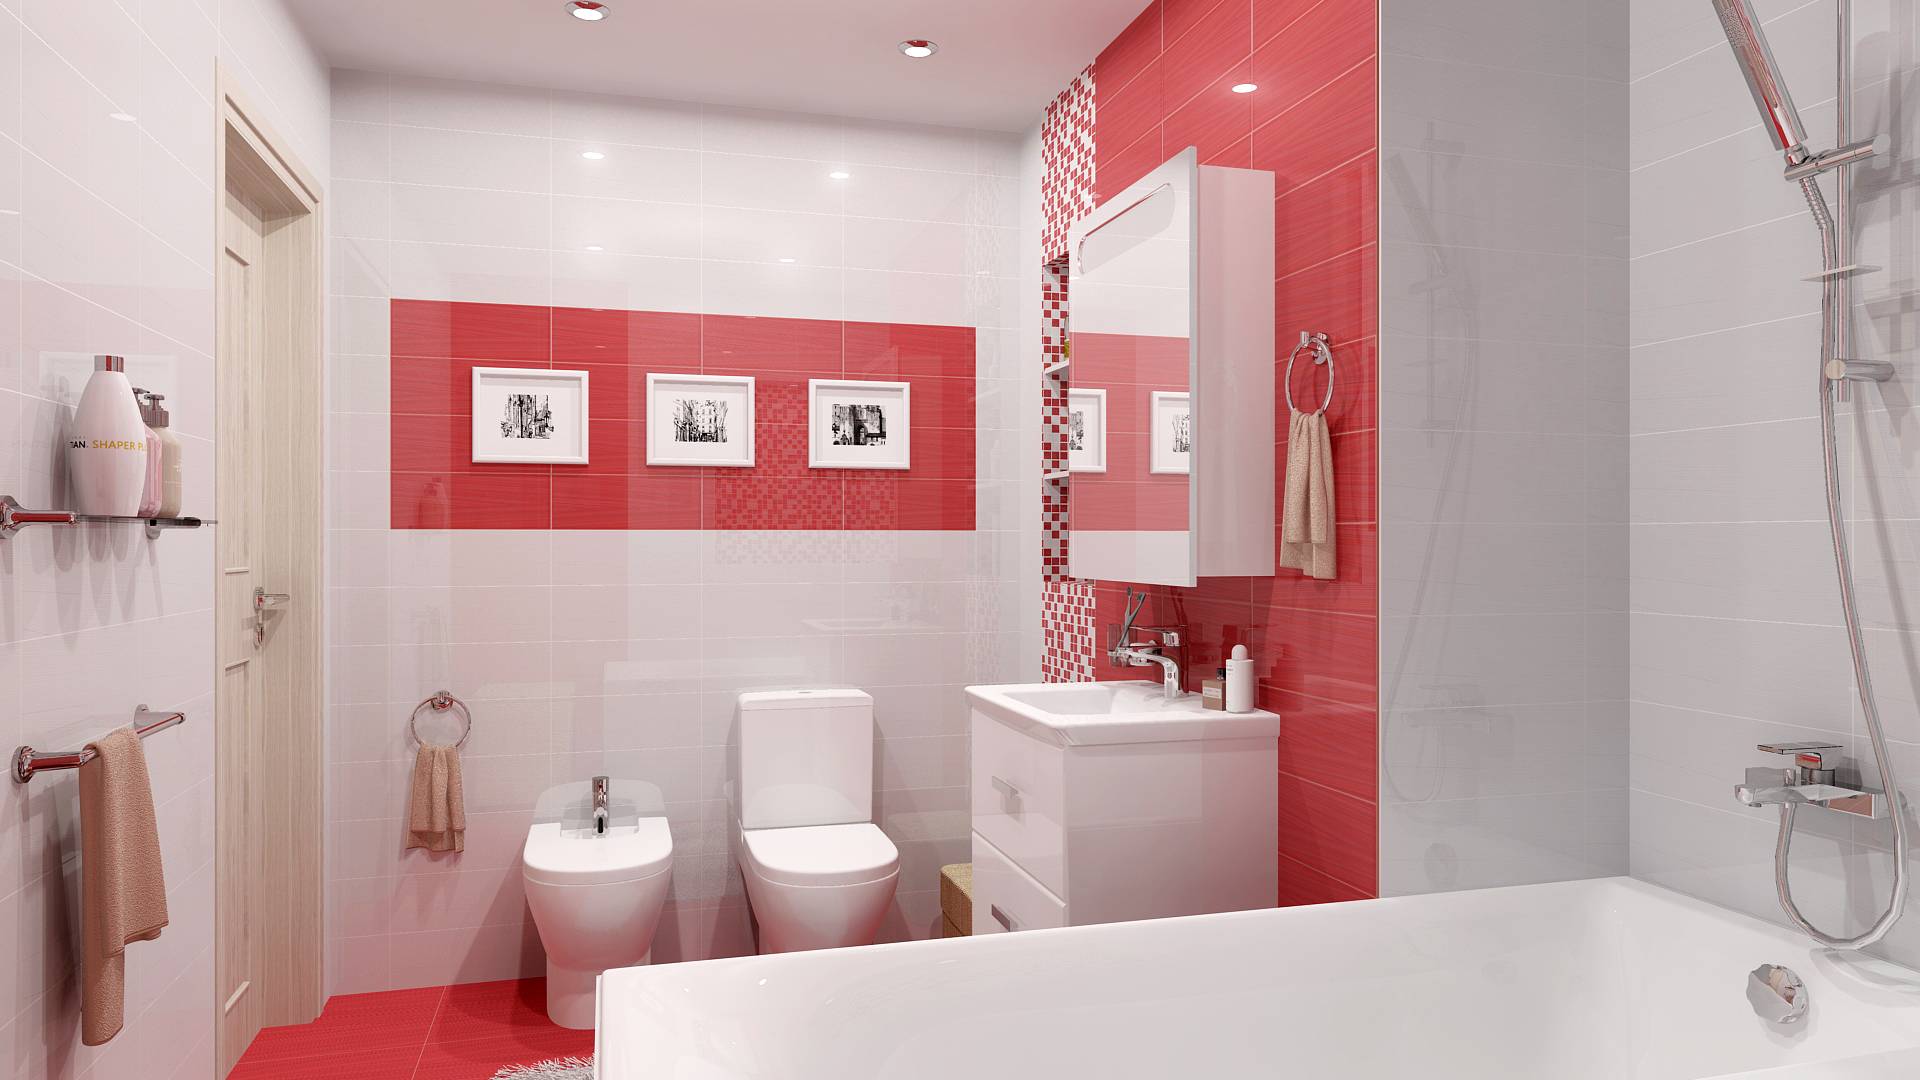 Transform Your Home with Stunning Bathroom Remodeling in Orange County